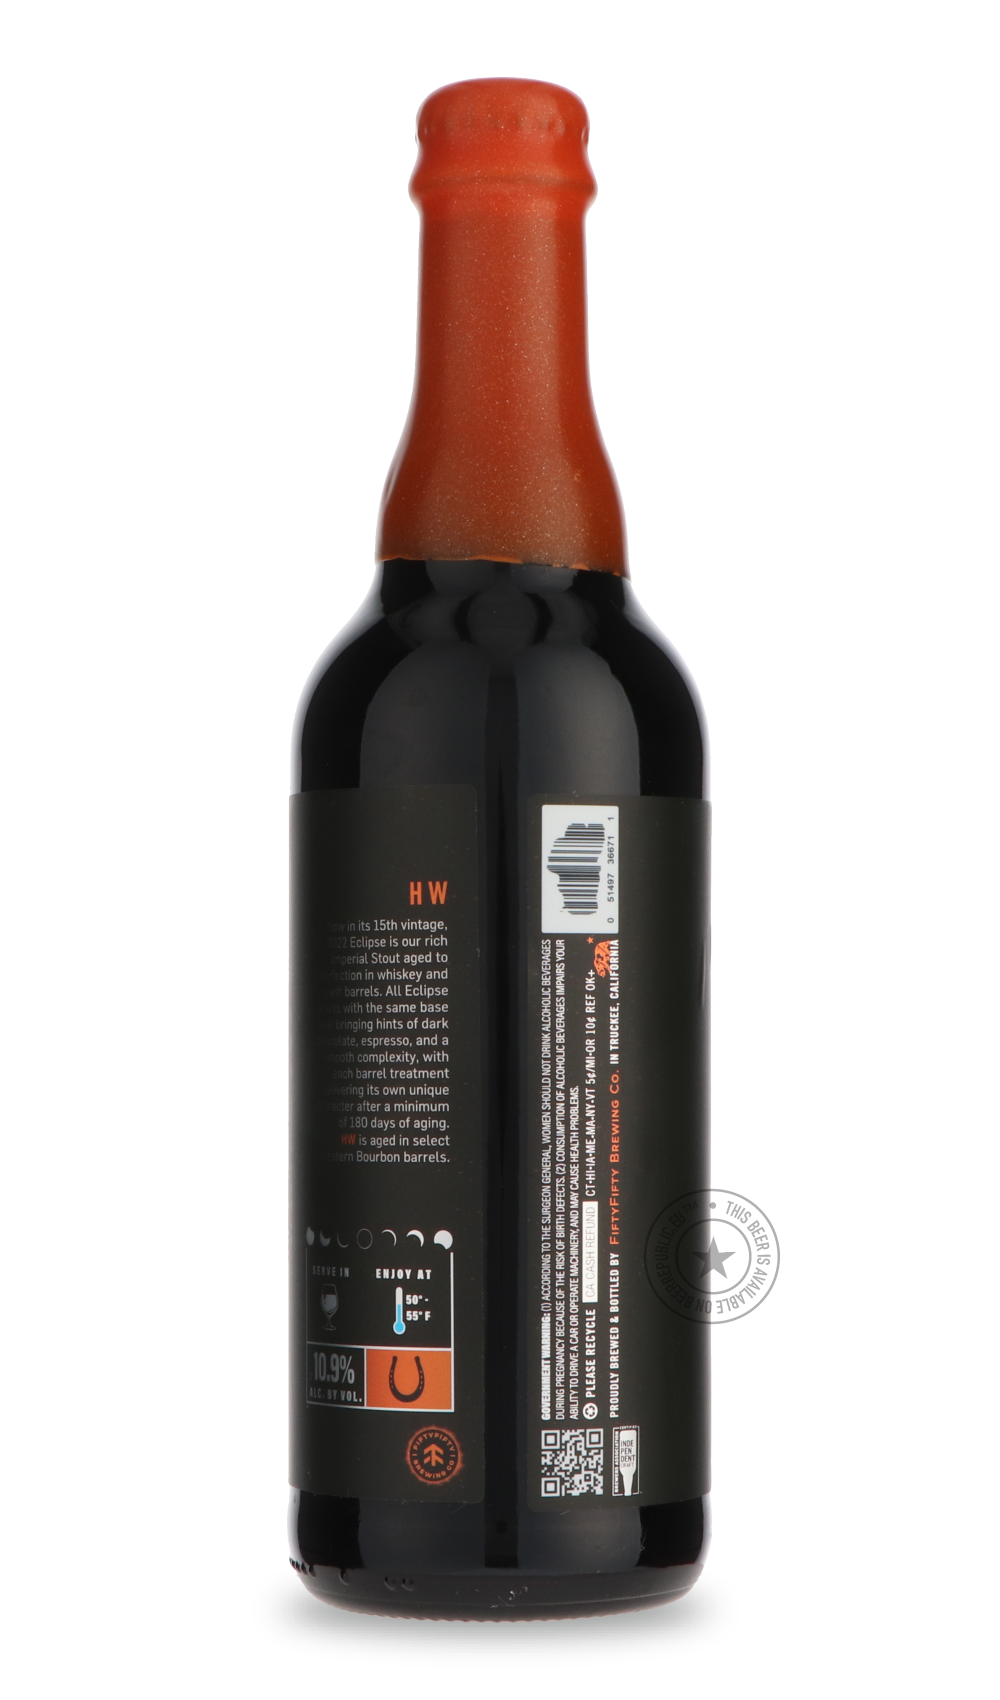 -FiftyFifty- Eclipse - High West Bourbon (2022)-Stout & Porter- Only @ Beer Republic - The best online beer store for American & Canadian craft beer - Buy beer online from the USA and Canada - Bier online kopen - Amerikaans bier kopen - Craft beer store - Craft beer kopen - Amerikanisch bier kaufen - Bier online kaufen - Acheter biere online - IPA - Stout - Porter - New England IPA - Hazy IPA - Imperial Stout - Barrel Aged - Barrel Aged Imperial Stout - Brown - Dark beer - Blond - Blonde - Pilsner - Lager -